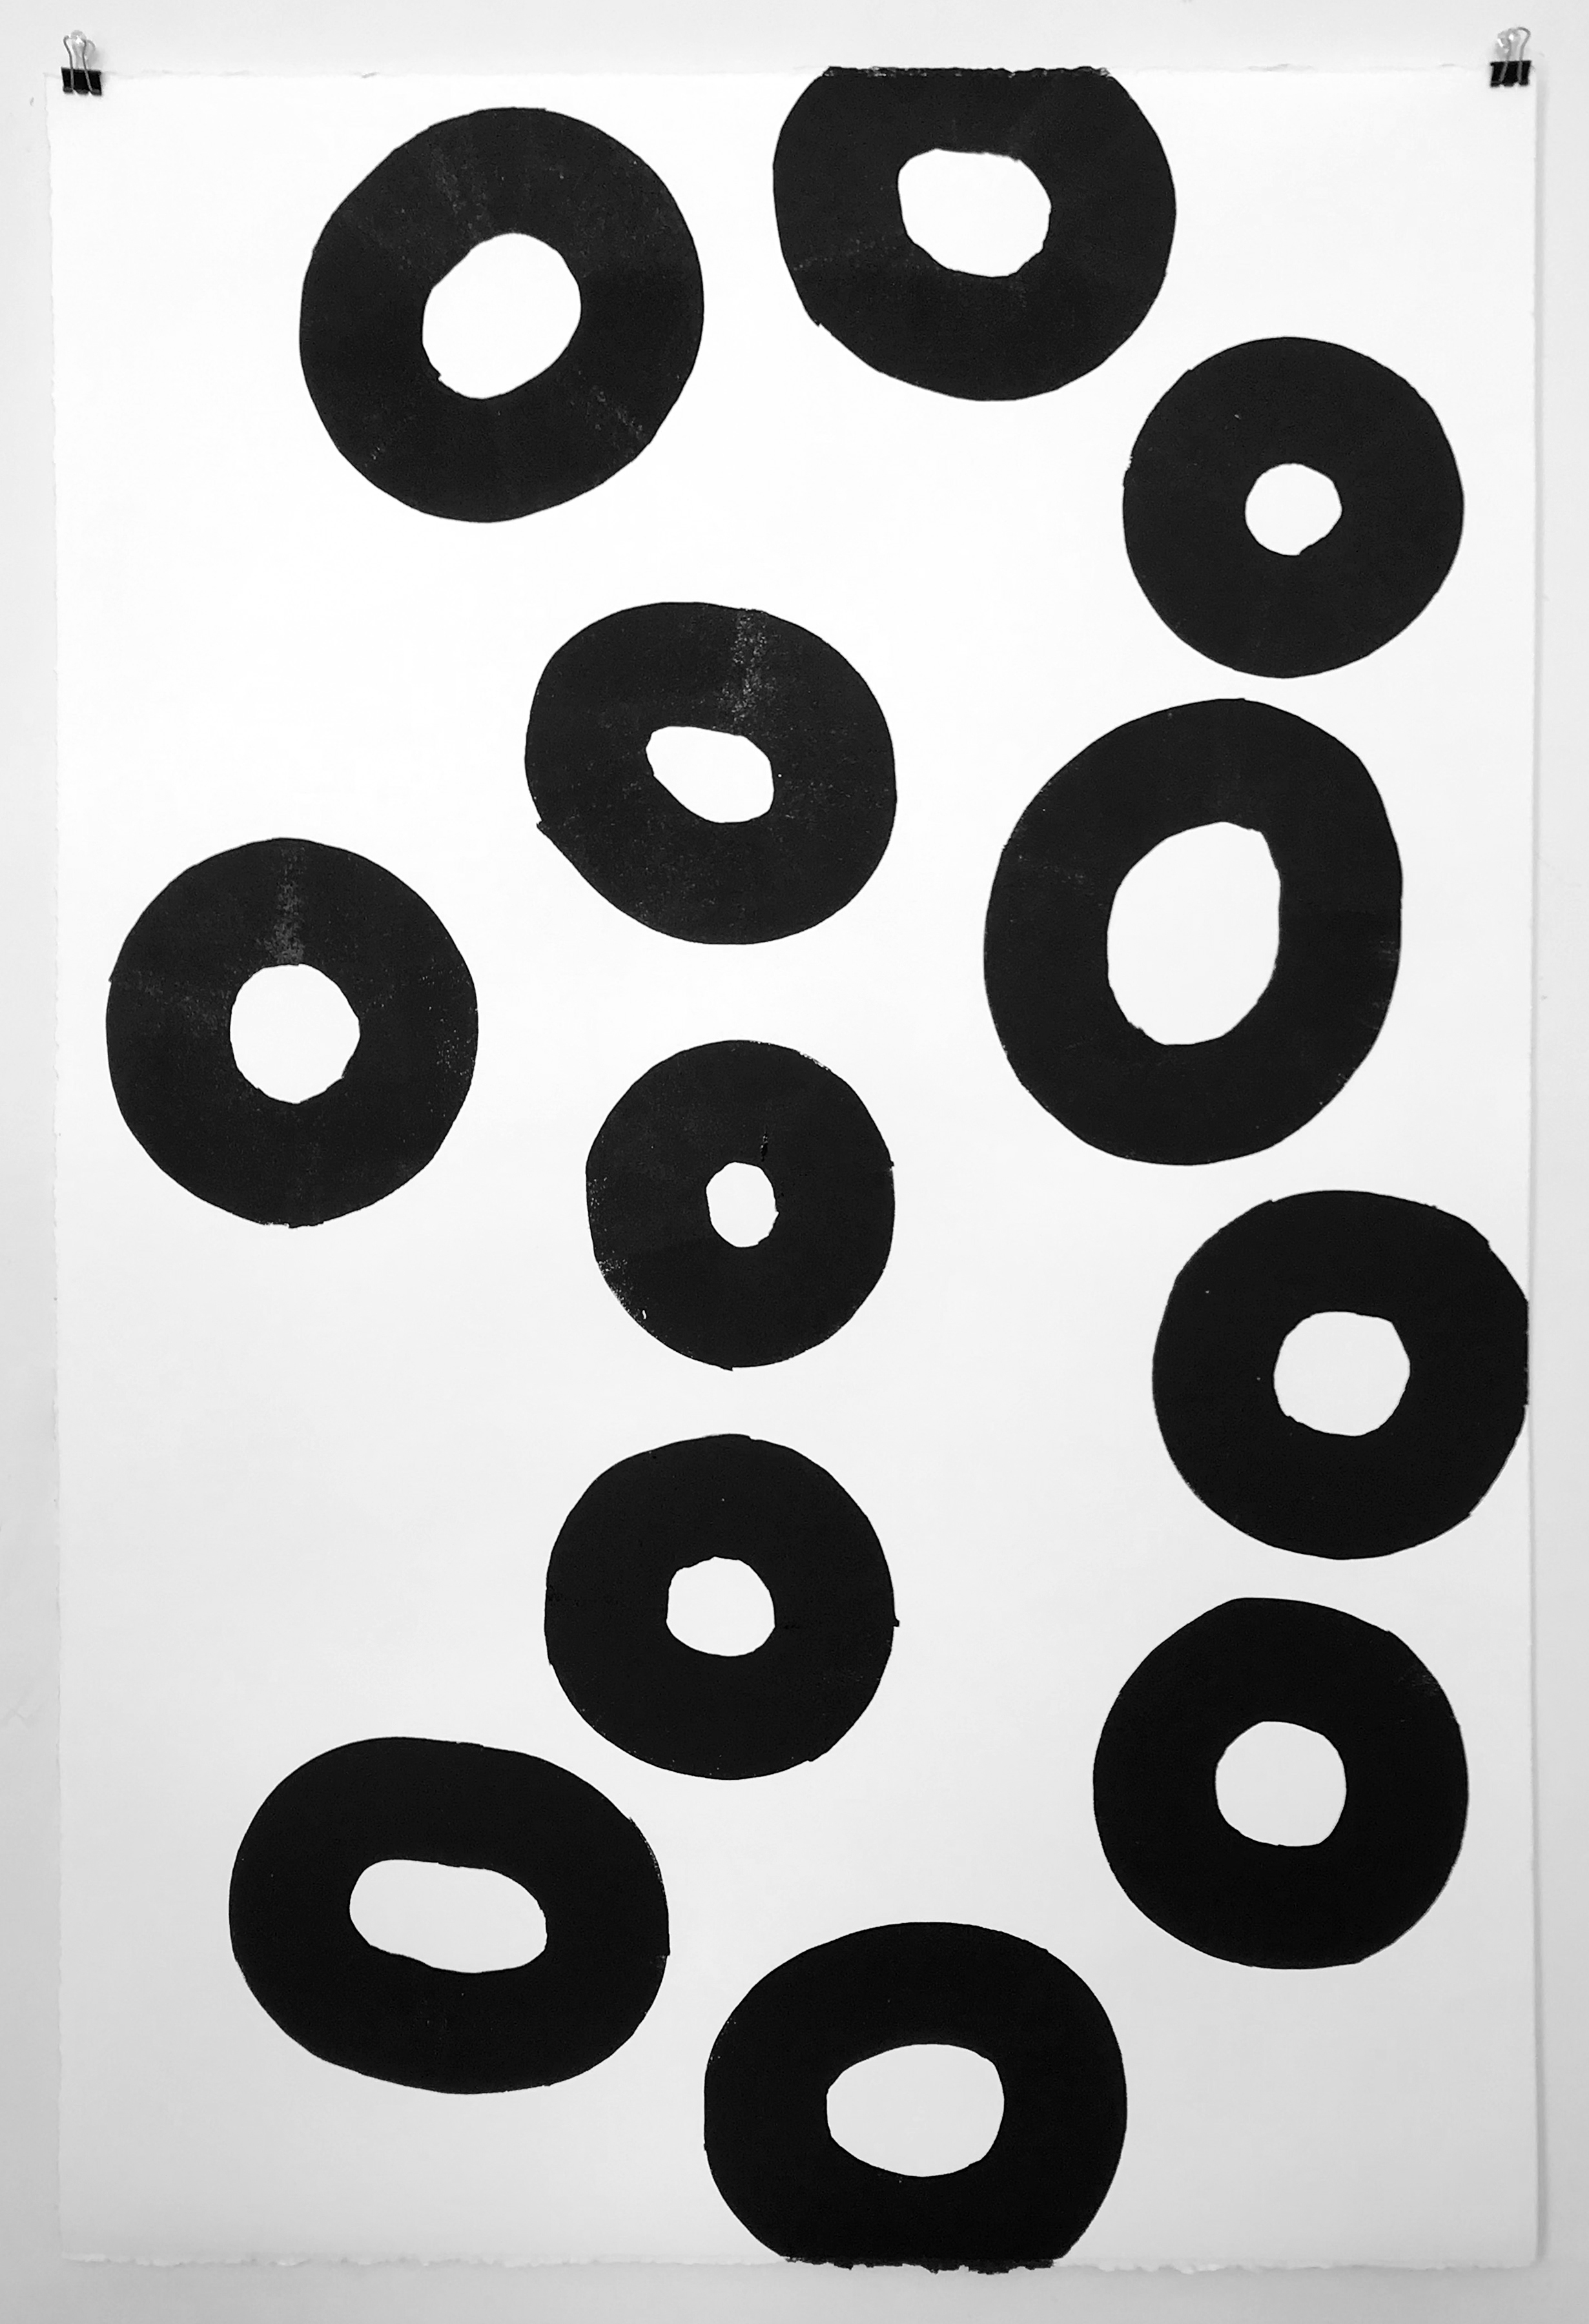  M&amp;M’s for Lucio Fontana, 2019, Litho ink on paper, 44 x 30 inches (unframed) 